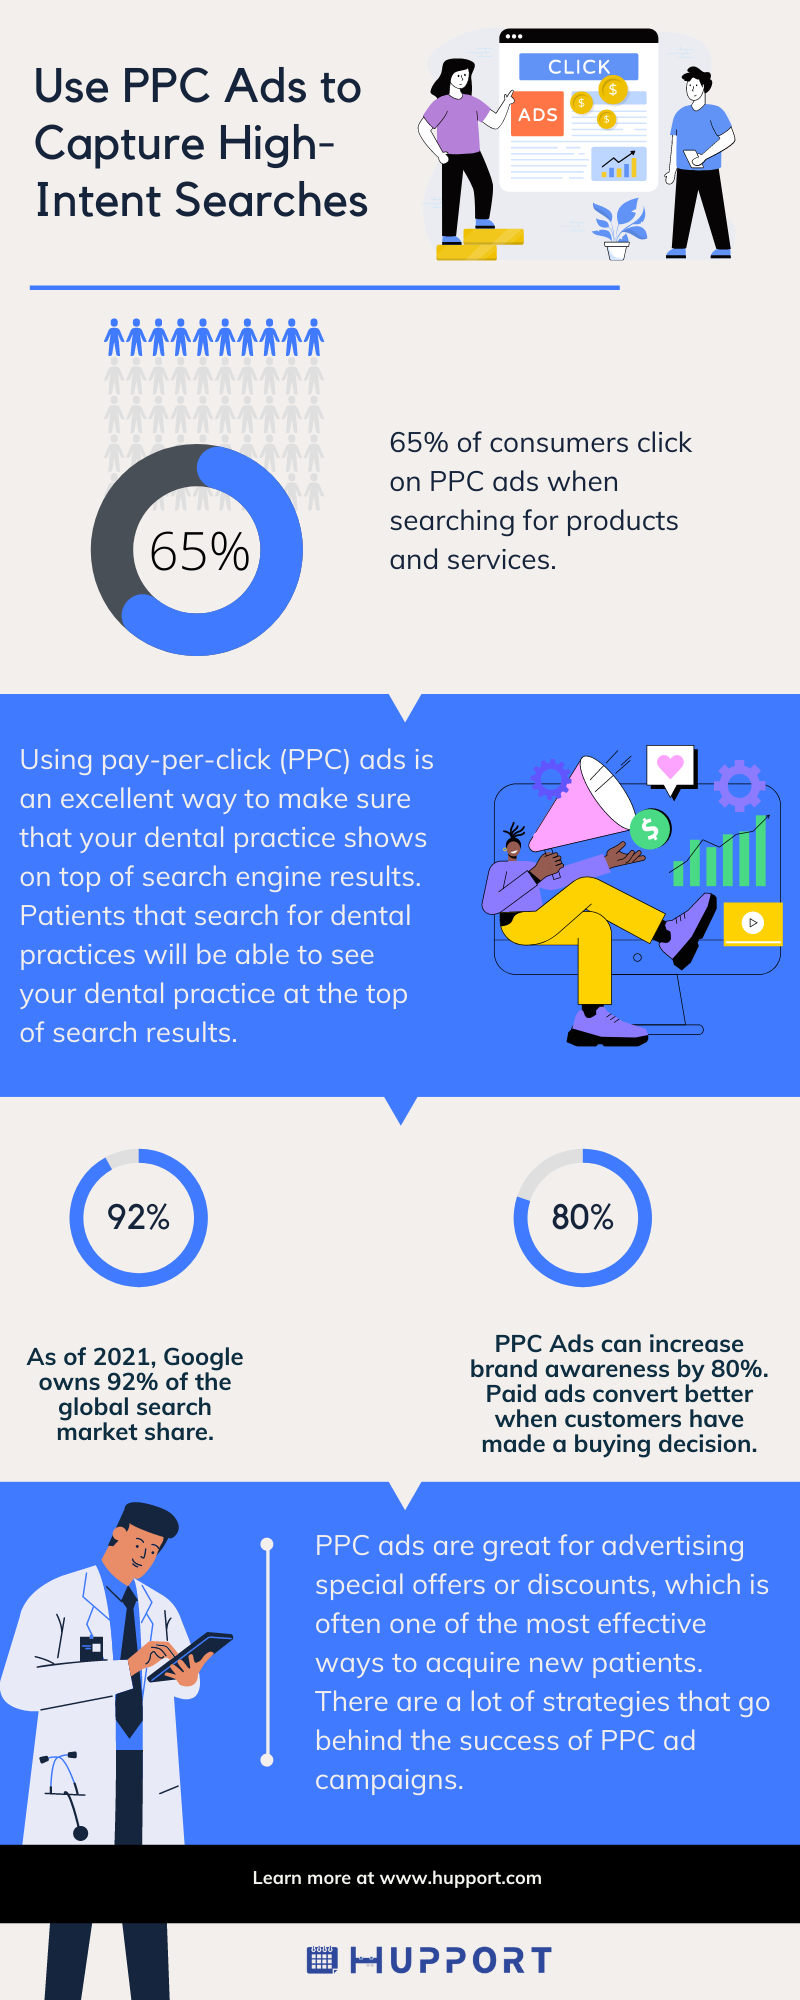 Use PPC Ads to Capture High-Intent Searches